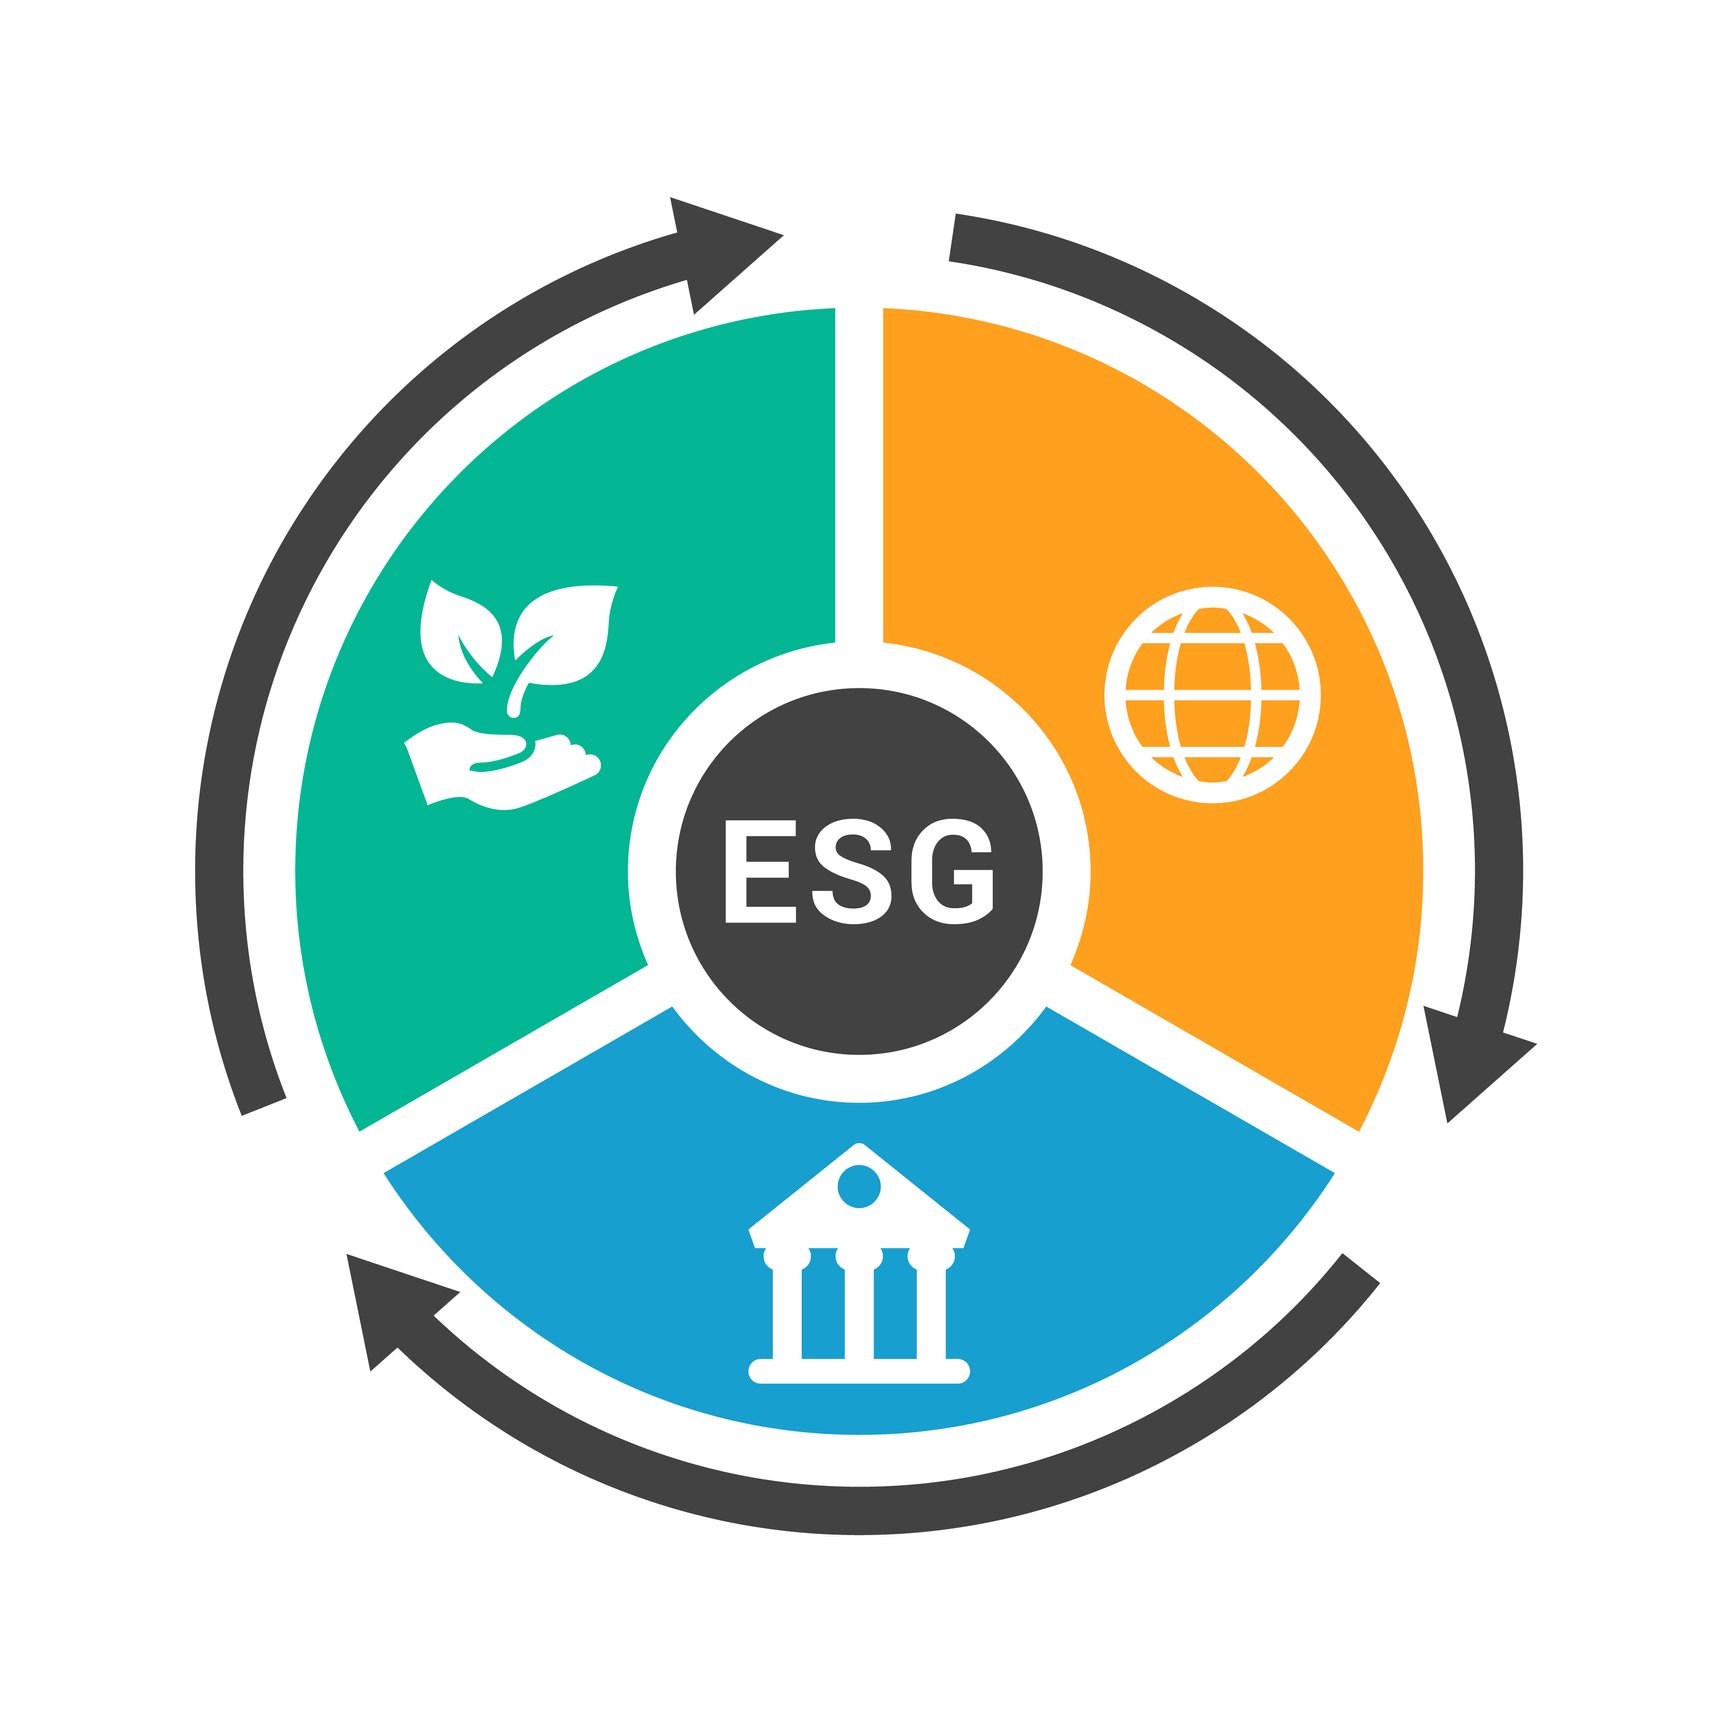 ESG finds a home in the insurance industry